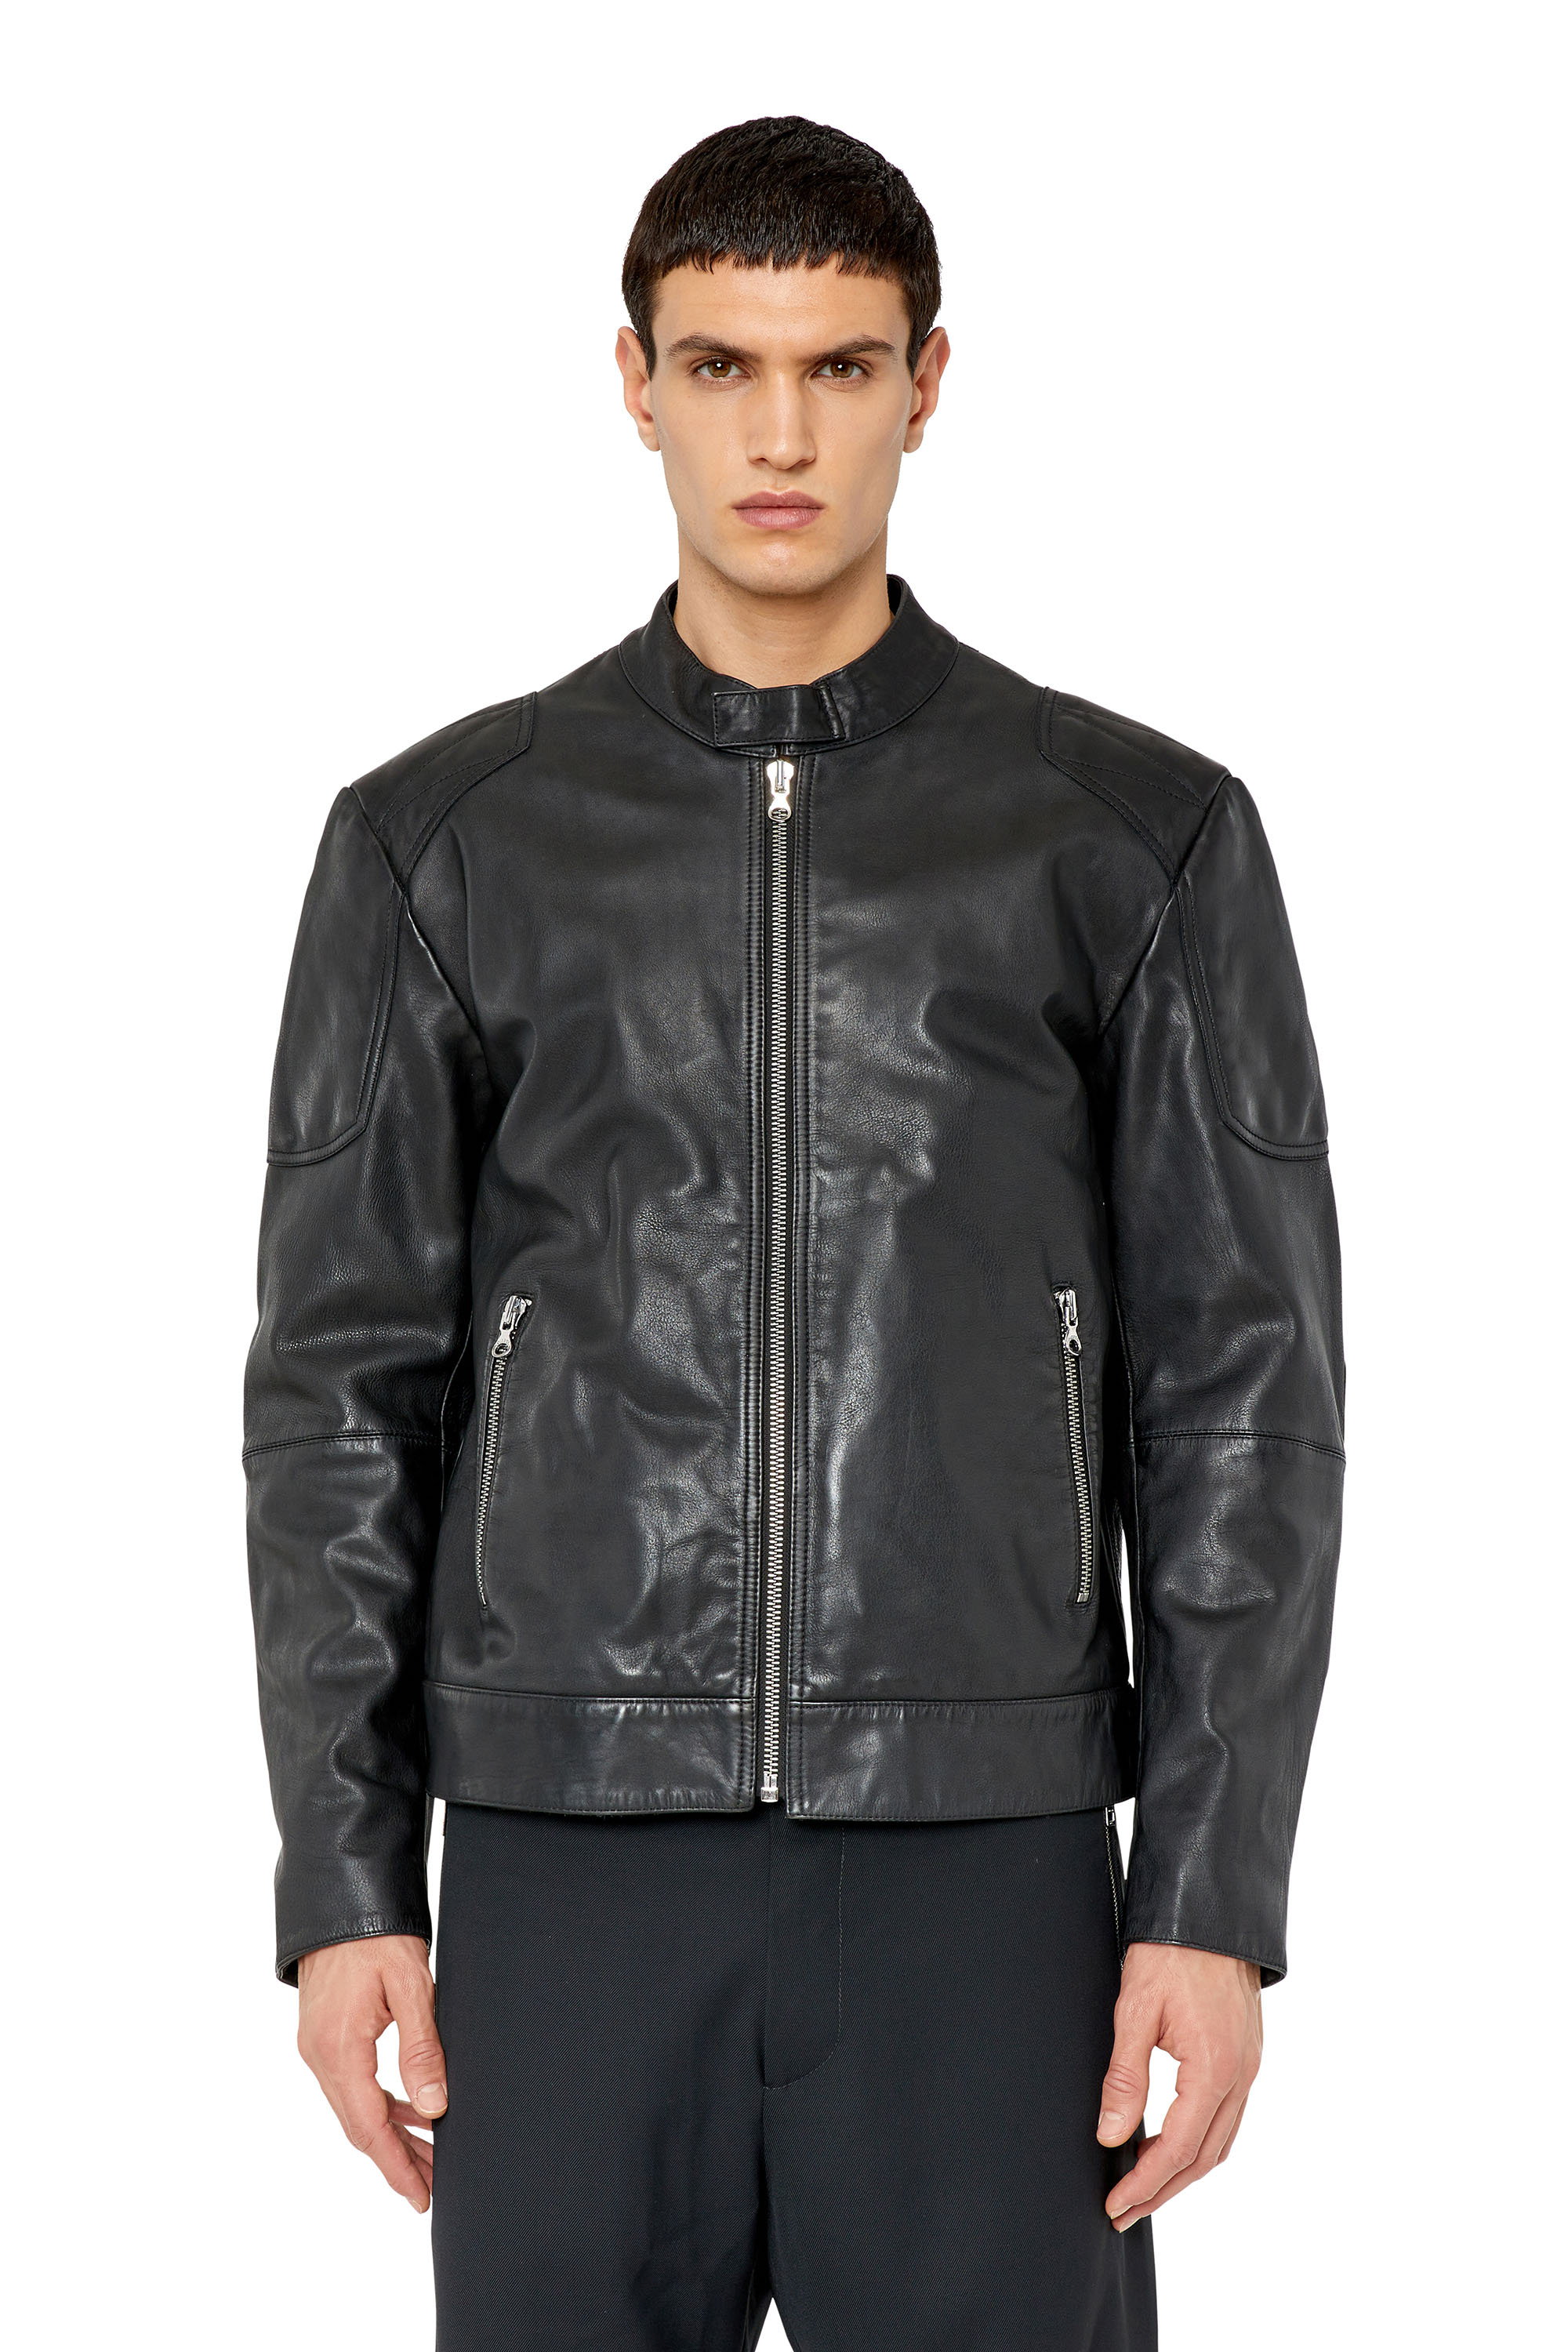 Men's Leather Jackets: Trench, Biker, Perforated | Diesel®